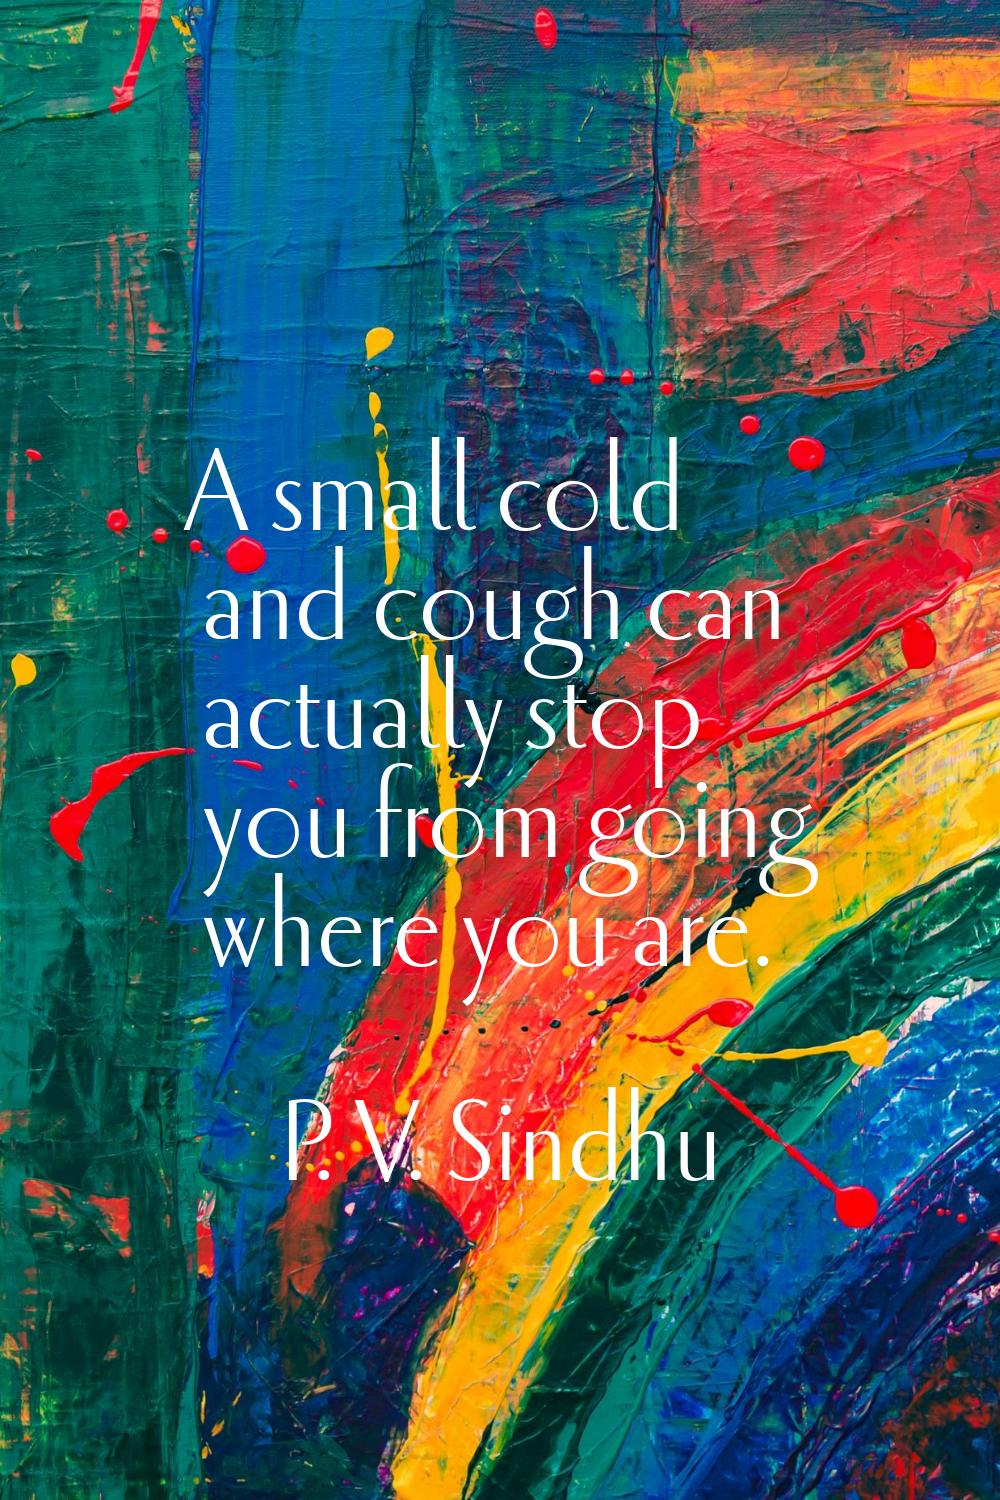 A small cold and cough can actually stop you from going where you are.